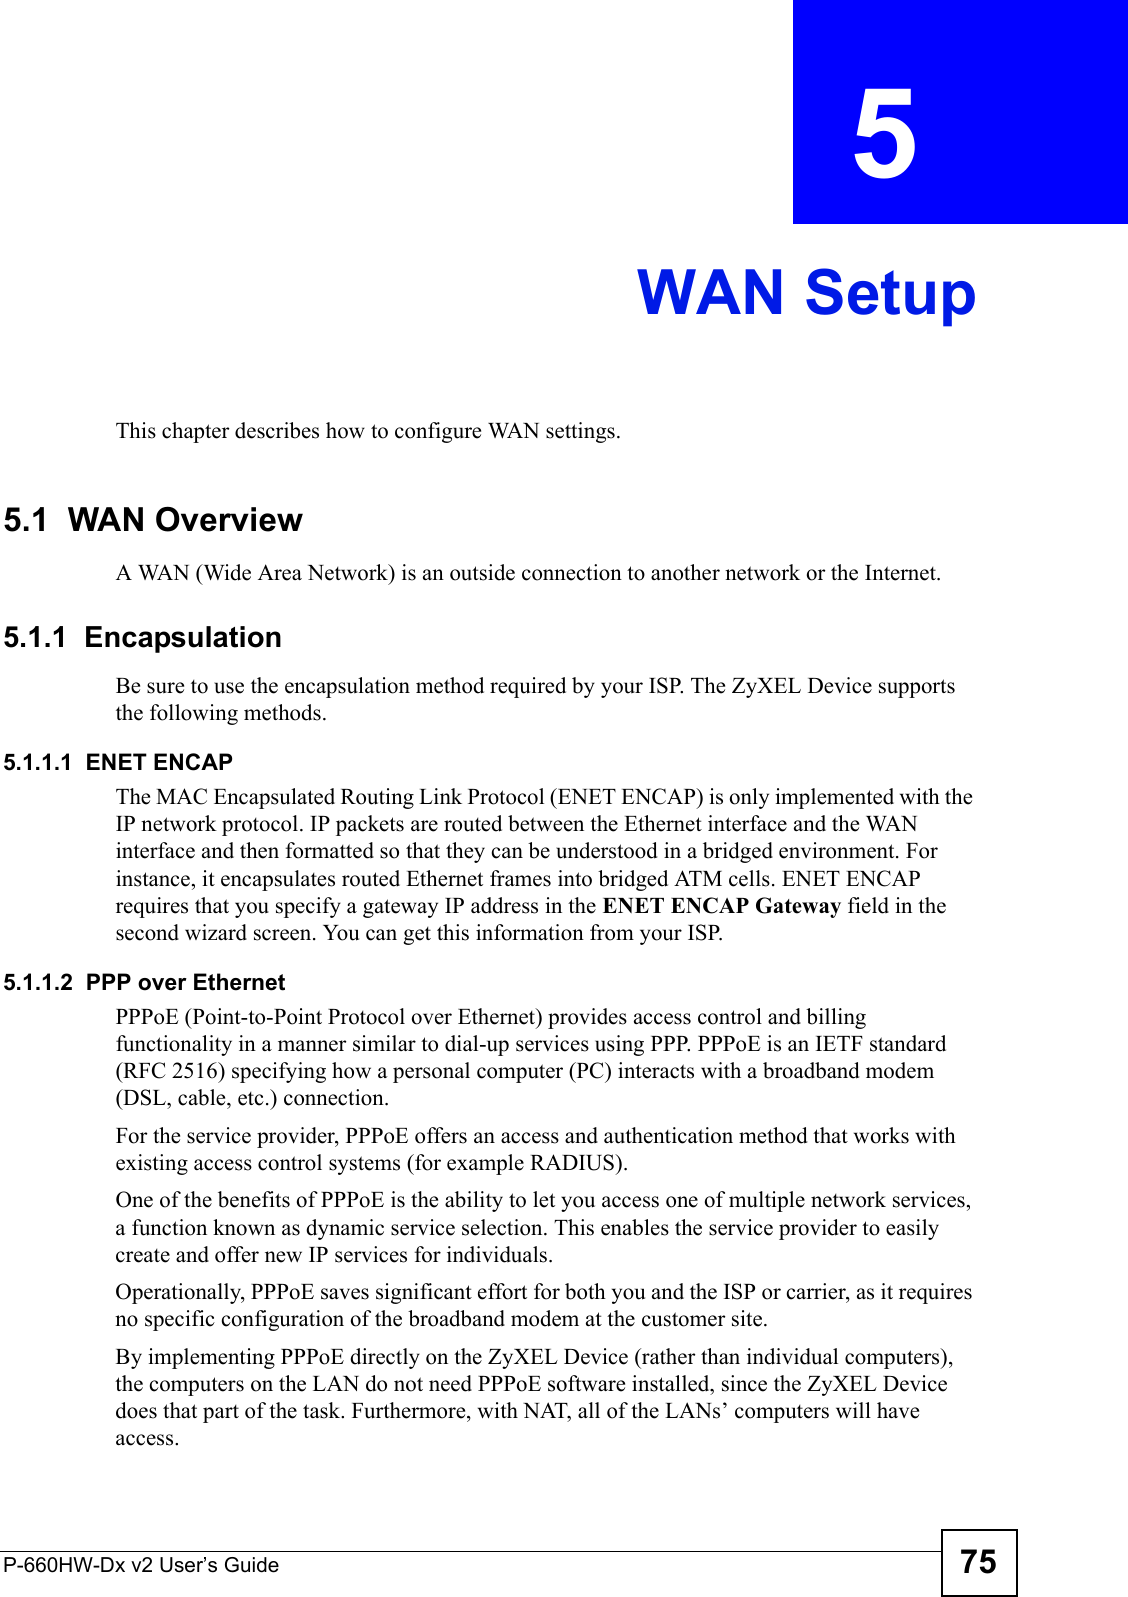 P-660HW-Dx v2 User’s Guide 75CHAPTER  5 WAN SetupThis chapter describes how to configure WAN settings.5.1  WAN Overview A WAN (Wide Area Network) is an outside connection to another network or the Internet.5.1.1  EncapsulationBe sure to use the encapsulation method required by your ISP. The ZyXEL Device supports the following methods.5.1.1.1  ENET ENCAPThe MAC Encapsulated Routing Link Protocol (ENET ENCAP) is only implemented with the IP network protocol. IP packets are routed between the Ethernet interface and the WAN interface and then formatted so that they can be understood in a bridged environment. For instance, it encapsulates routed Ethernet frames into bridged ATM cells. ENET ENCAP requires that you specify a gateway IP address in the ENET ENCAP Gateway field in the second wizard screen. You can get this information from your ISP.5.1.1.2  PPP over EthernetPPPoE (Point-to-Point Protocol over Ethernet) provides access control and billing functionality in a manner similar to dial-up services using PPP. PPPoE is an IETF standard (RFC 2516) specifying how a personal computer (PC) interacts with a broadband modem (DSL, cable, etc.) connection. For the service provider, PPPoE offers an access and authentication method that works with existing access control systems (for example RADIUS).One of the benefits of PPPoE is the ability to let you access one of multiple network services, a function known as dynamic service selection. This enables the service provider to easily create and offer new IP services for individuals.Operationally, PPPoE saves significant effort for both you and the ISP or carrier, as it requires no specific configuration of the broadband modem at the customer site.By implementing PPPoE directly on the ZyXEL Device (rather than individual computers), the computers on the LAN do not need PPPoE software installed, since the ZyXEL Device does that part of the task. Furthermore, with NAT, all of the LANs’ computers will have access.